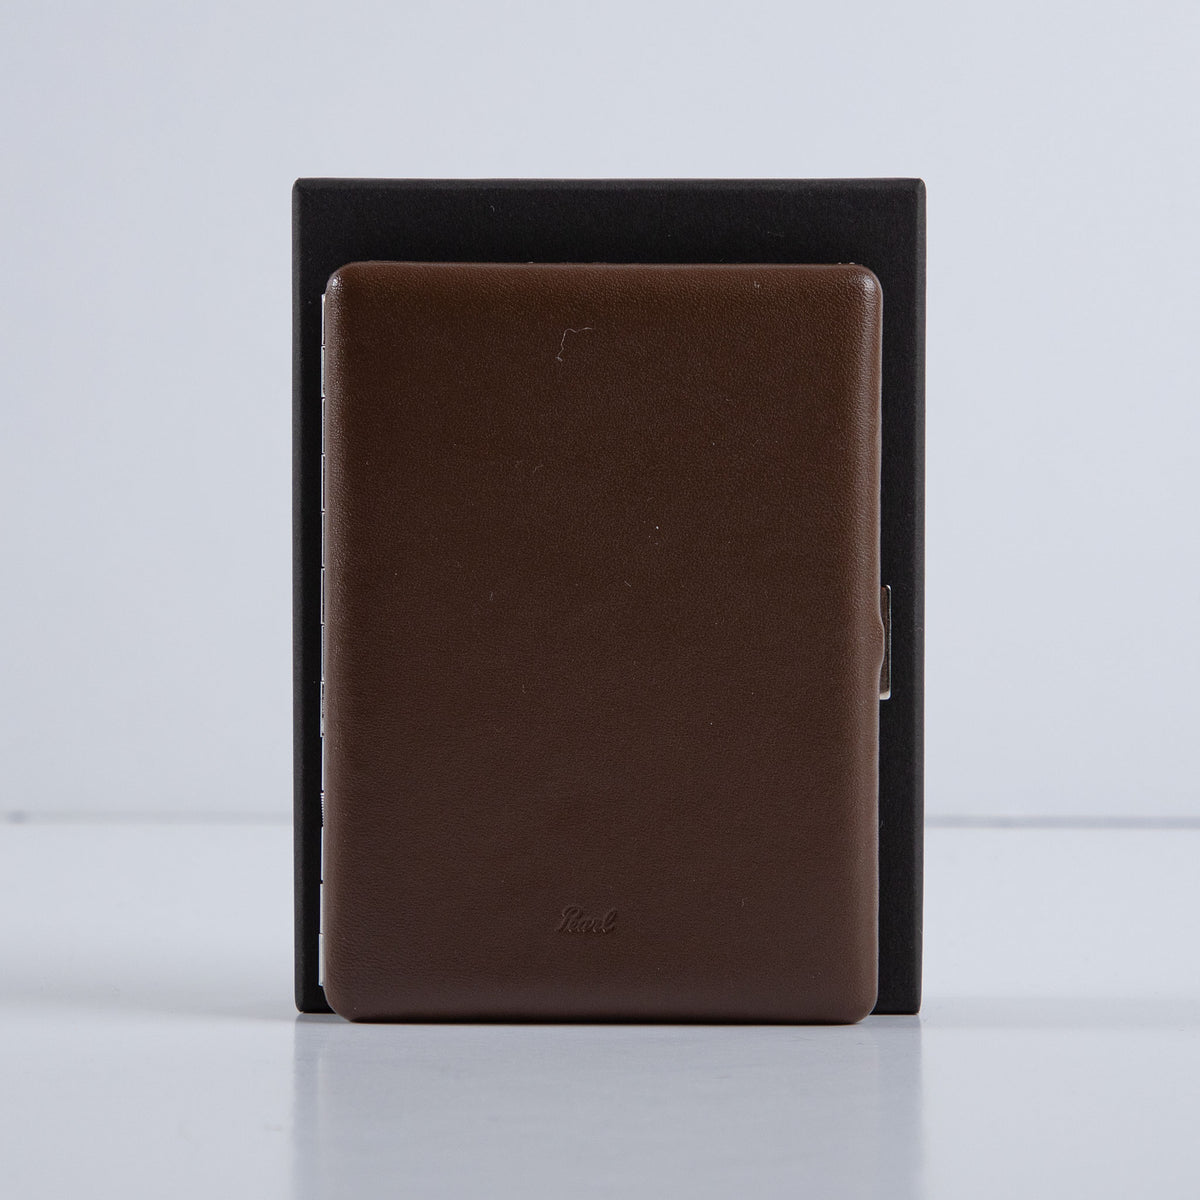 Cosmos Cigarette Case - Smooth Leather Brown